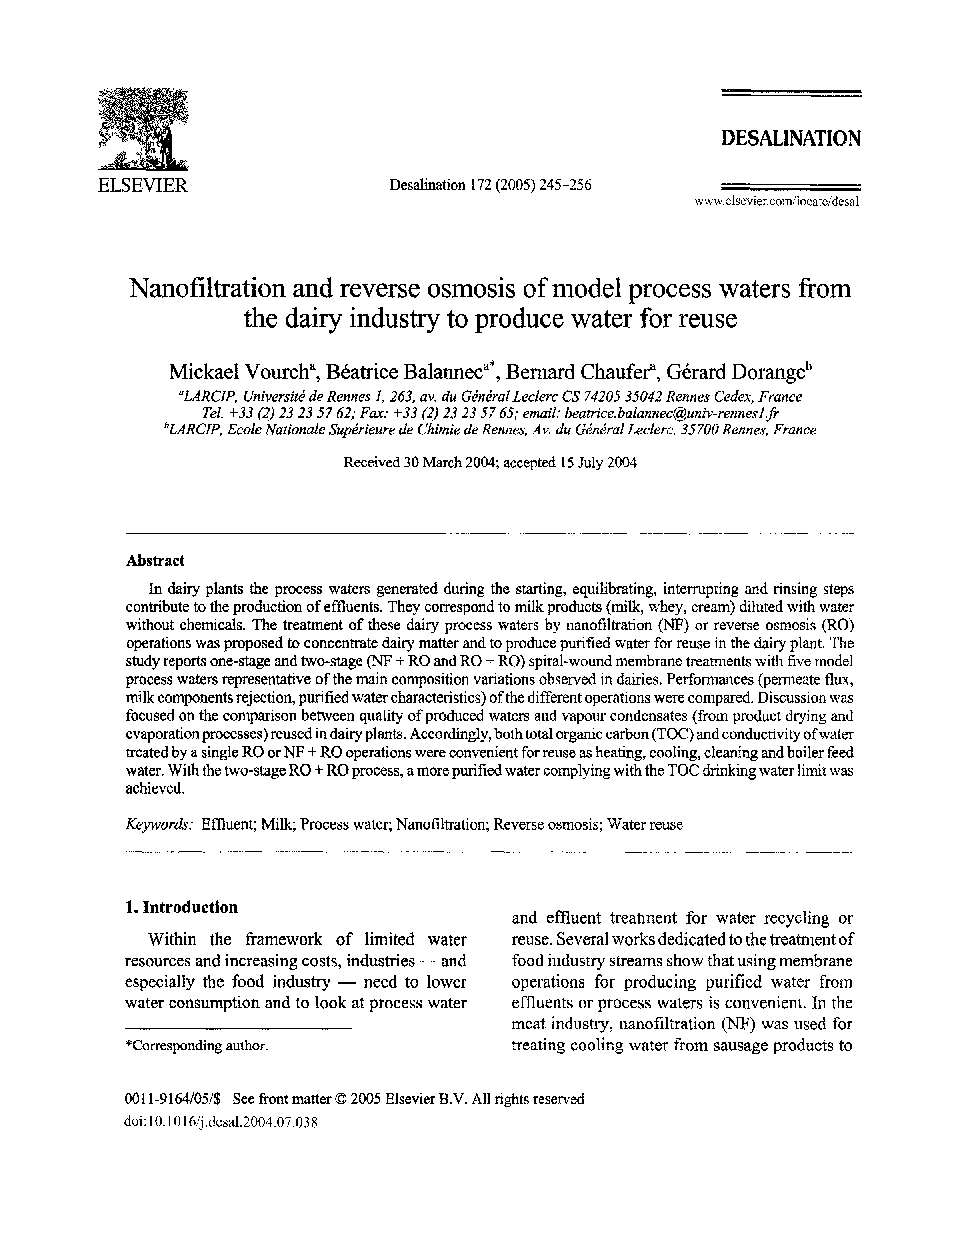 Nanofiltration and reverse osmosis of model process waters fromthe dairy industry to produce water for reuse